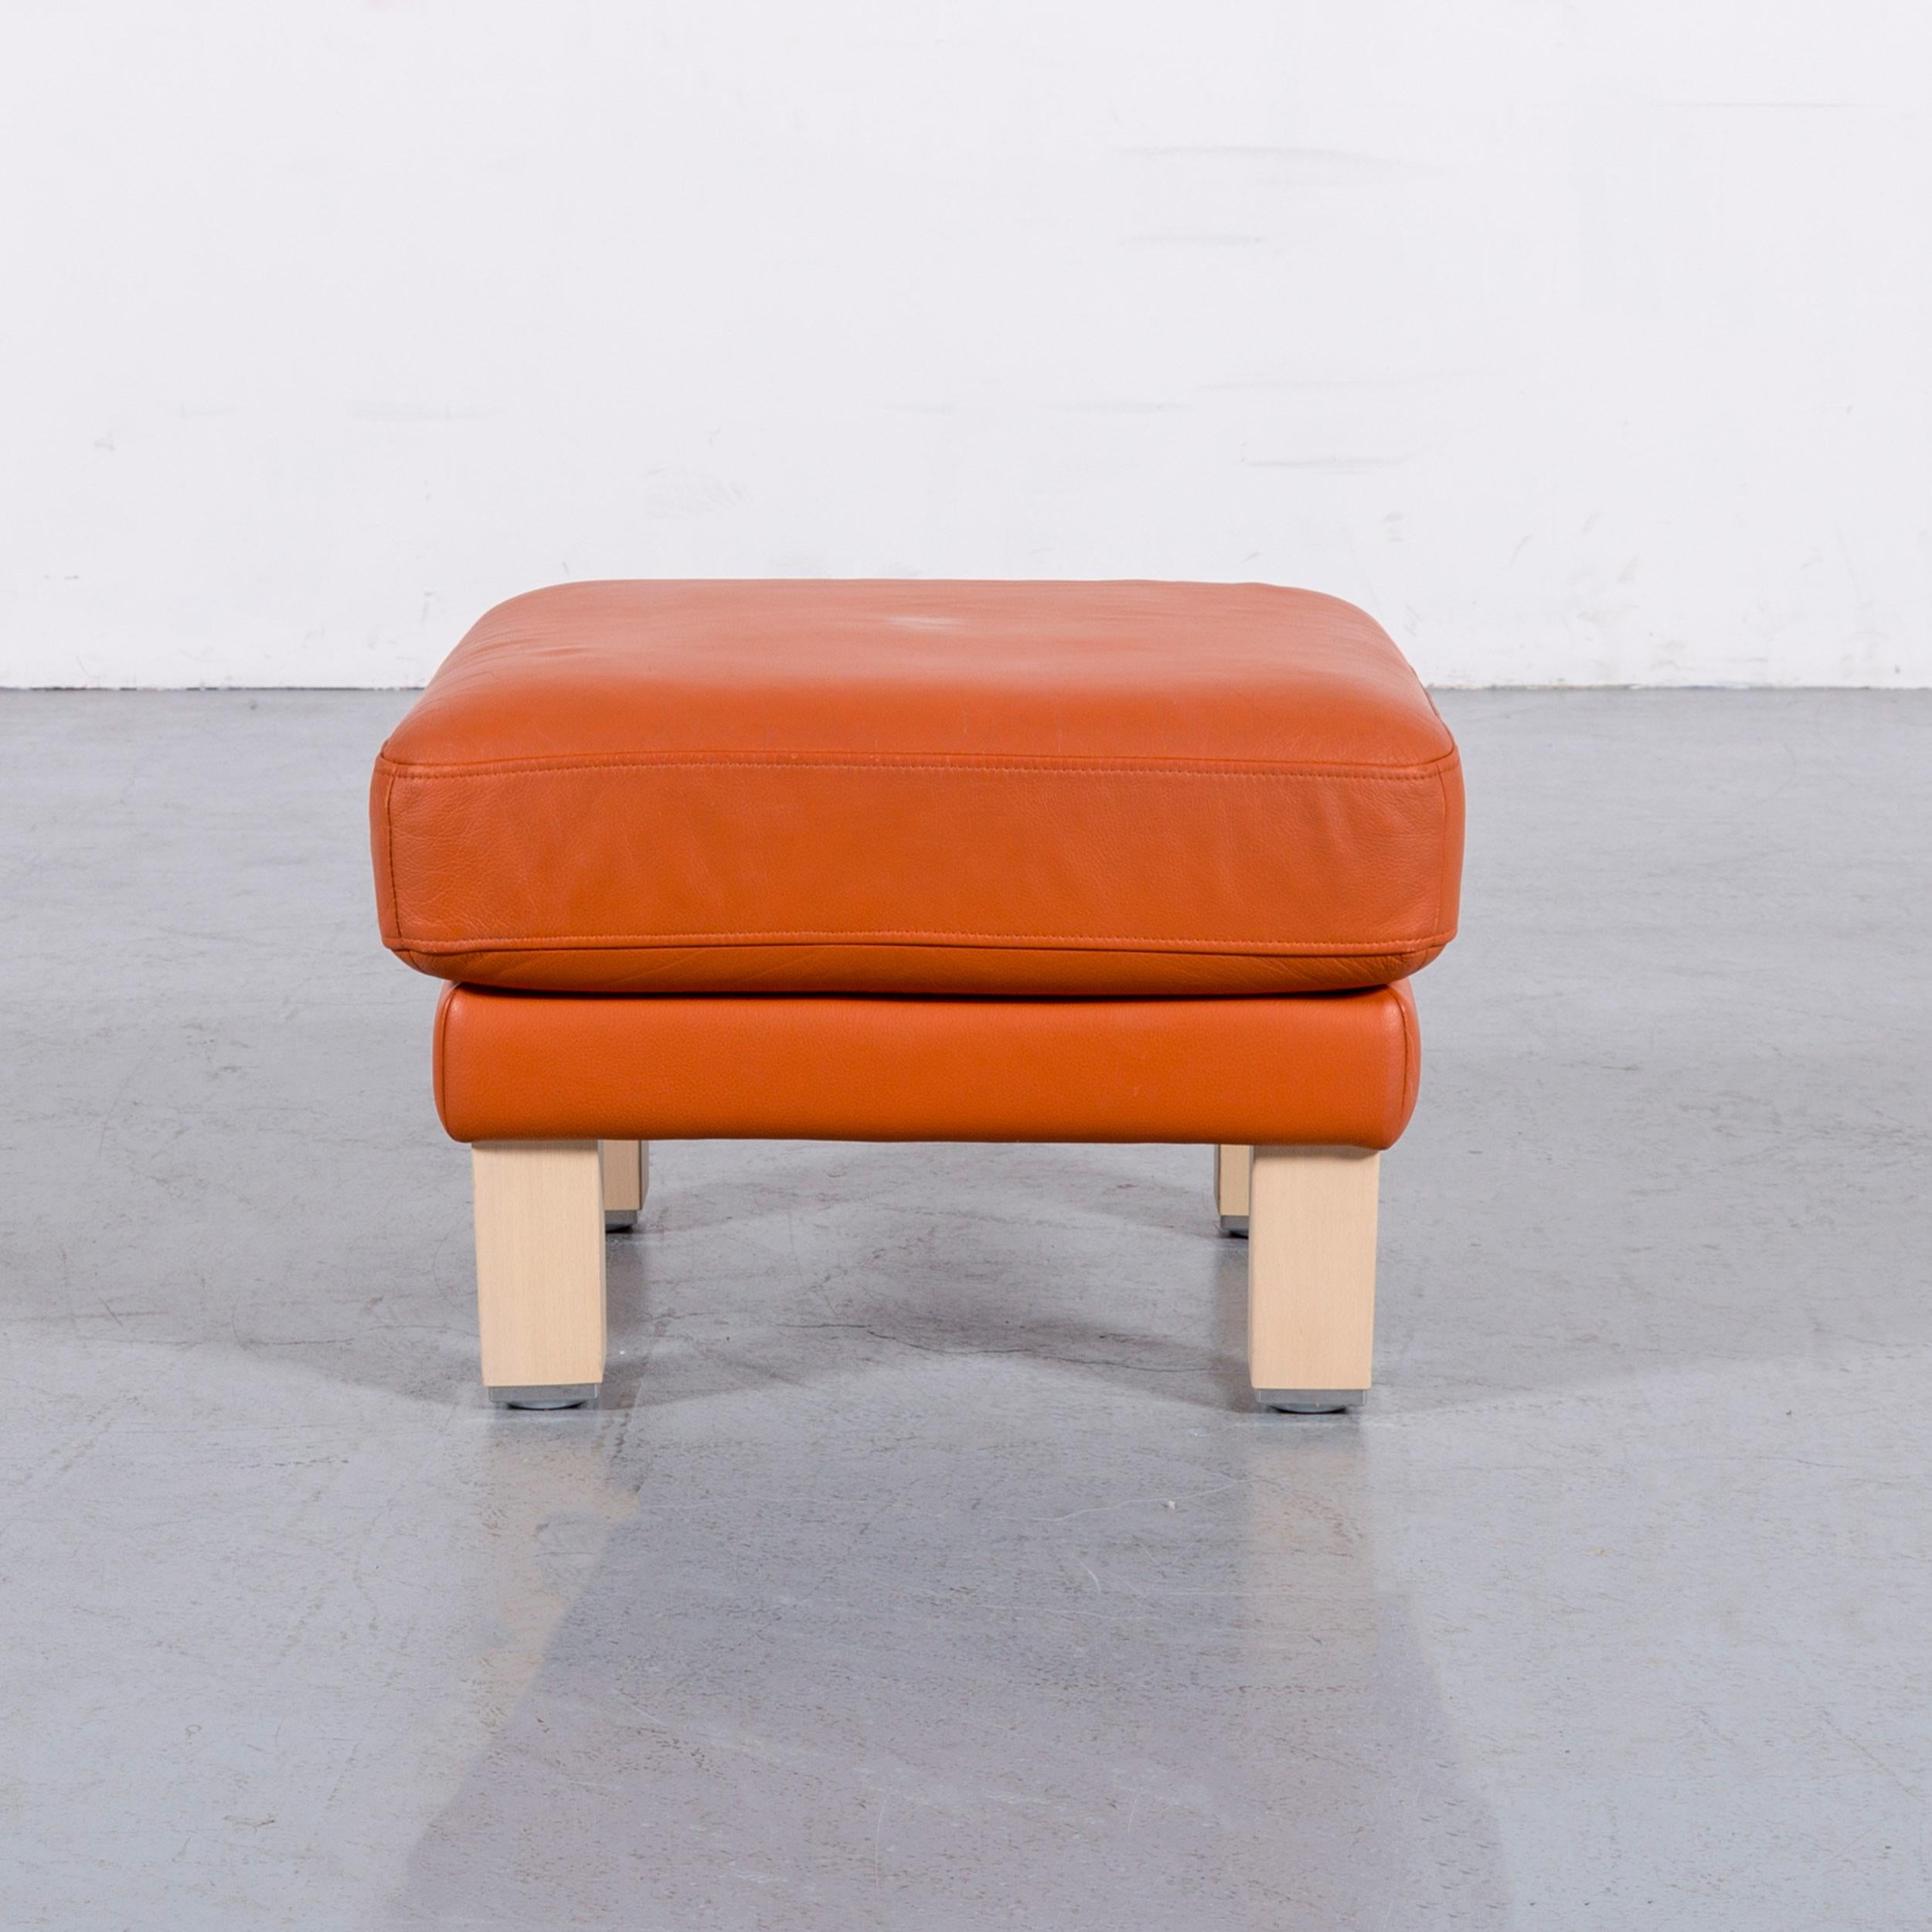 Rolf Benz Leather Foot-Stool Orange Bench For Sale 1